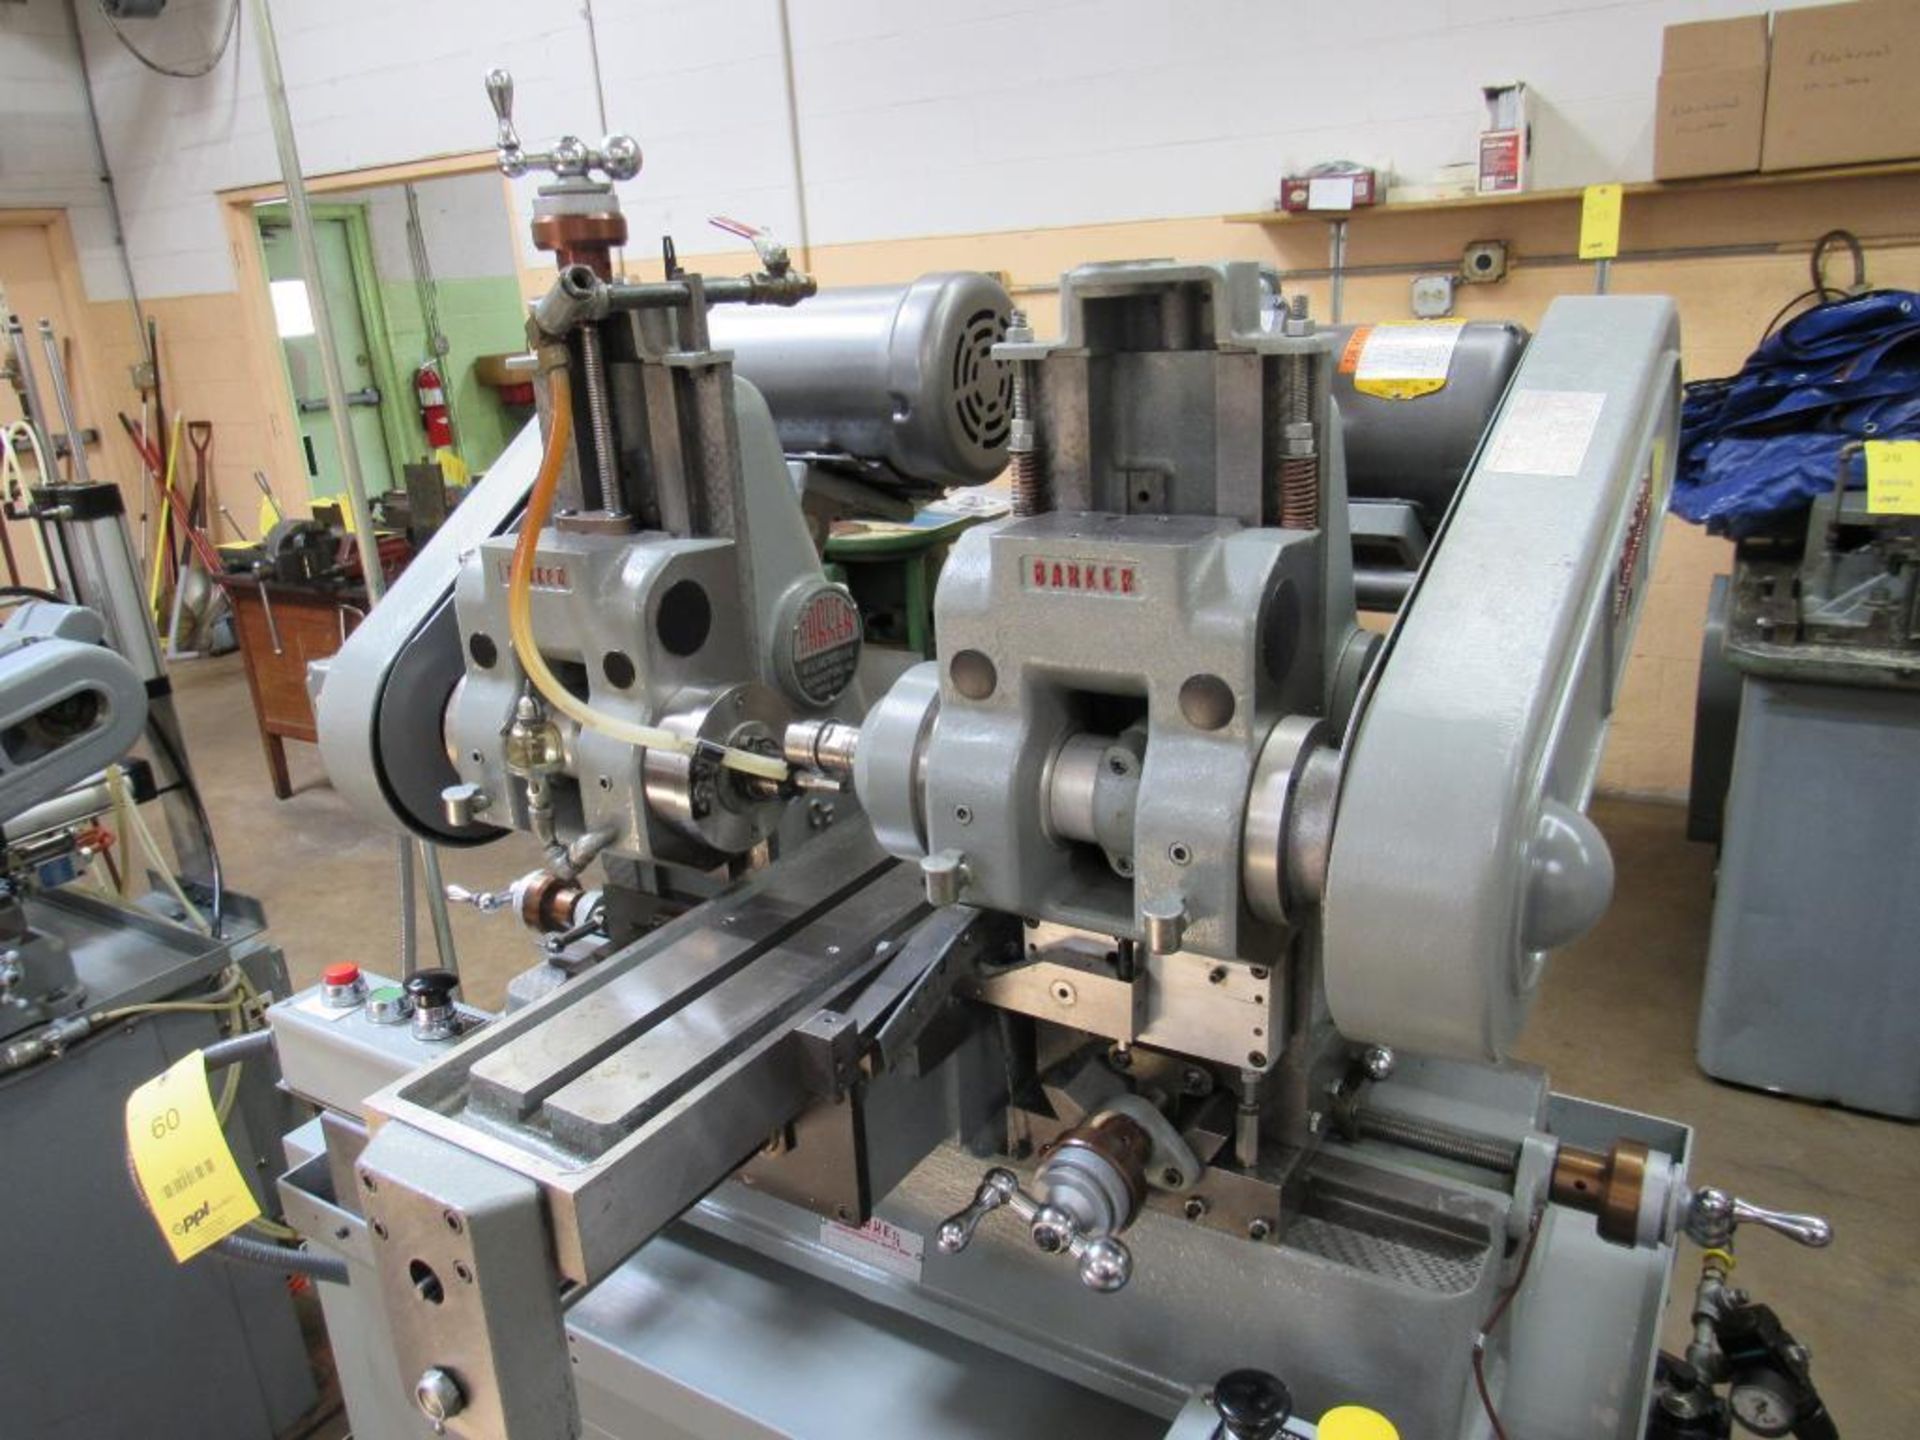 Barker 2-Spindle Horizontal Production Mill Model AMD2, S/N 1663LG, 6 in. x 20 in. Pneumatic Feed Wo - Image 2 of 4